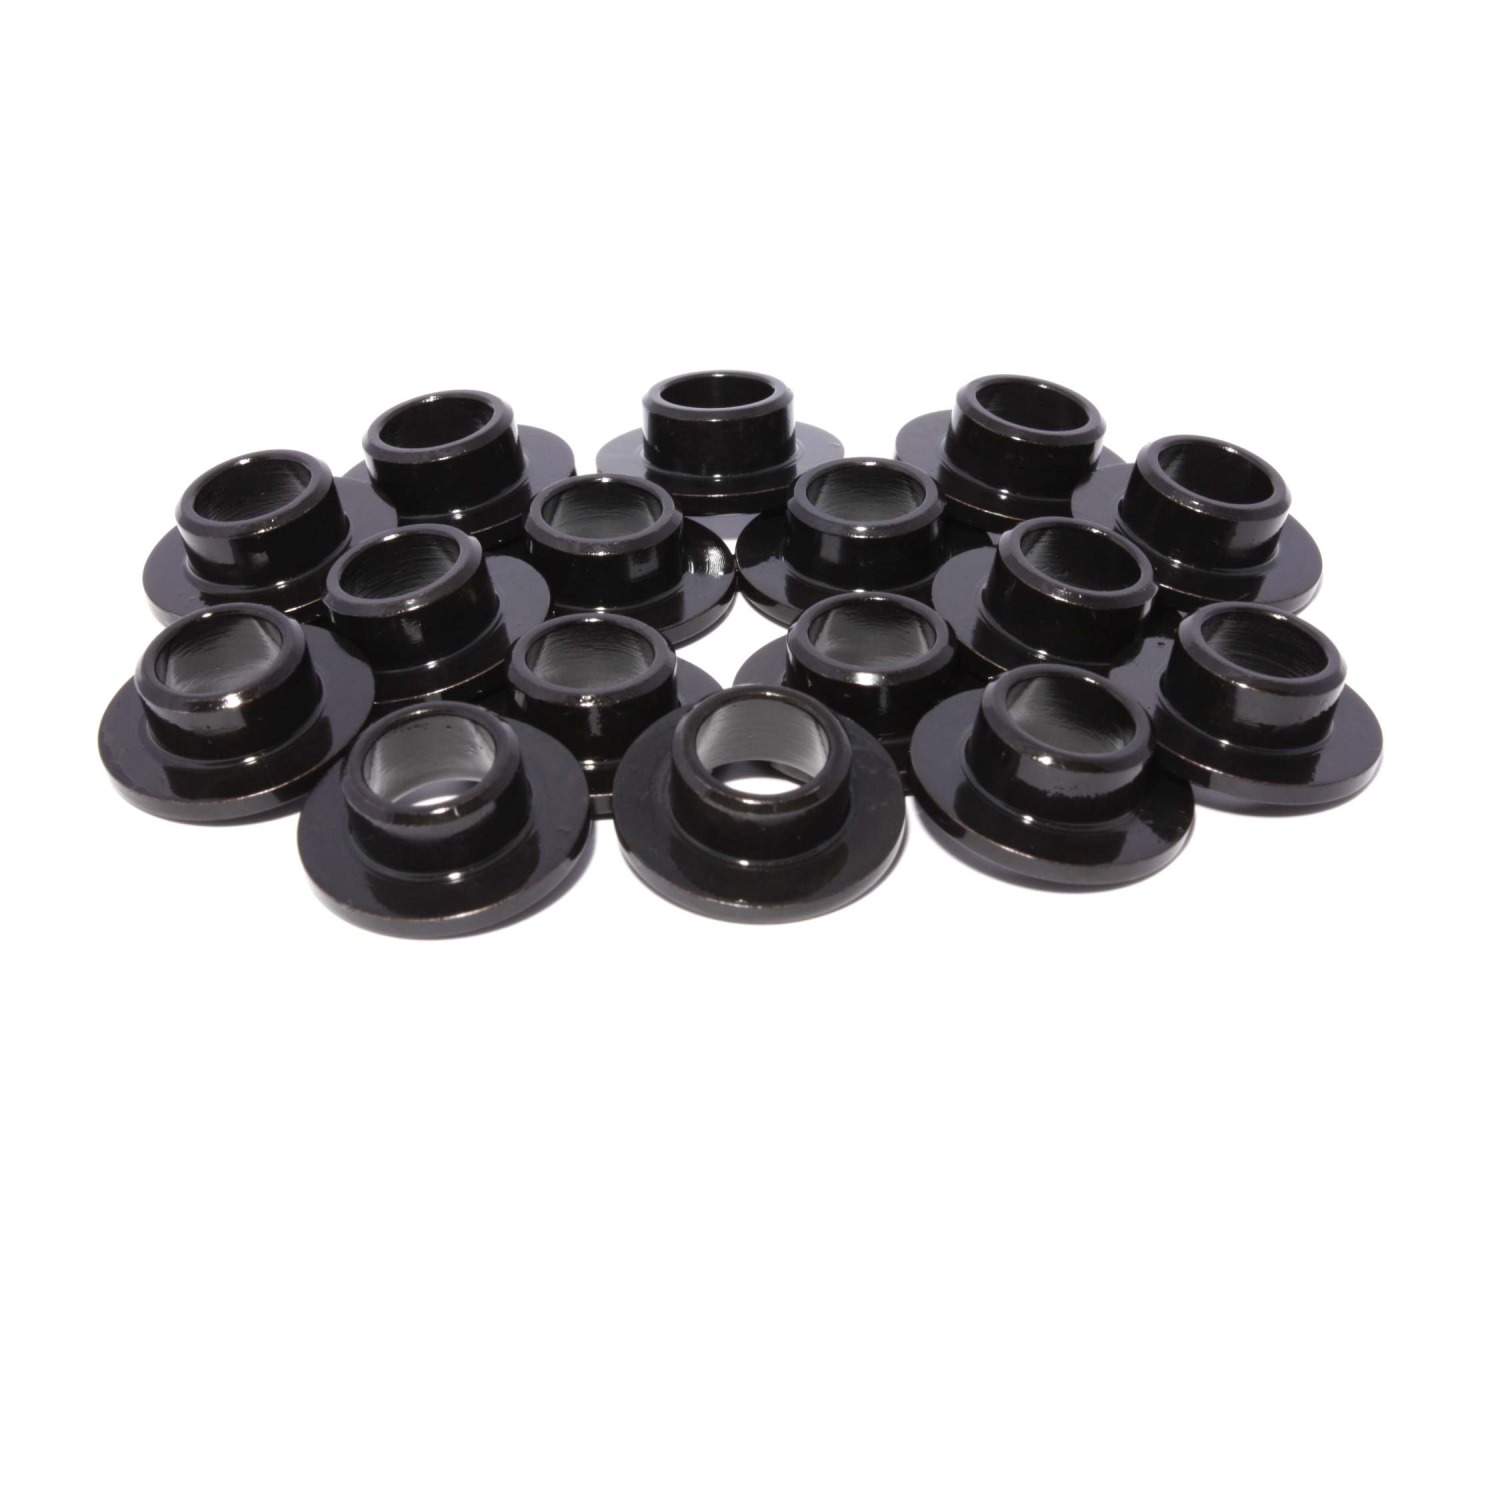 Cams 10 Degree Steel Retainers For 26120 Beehive Springs